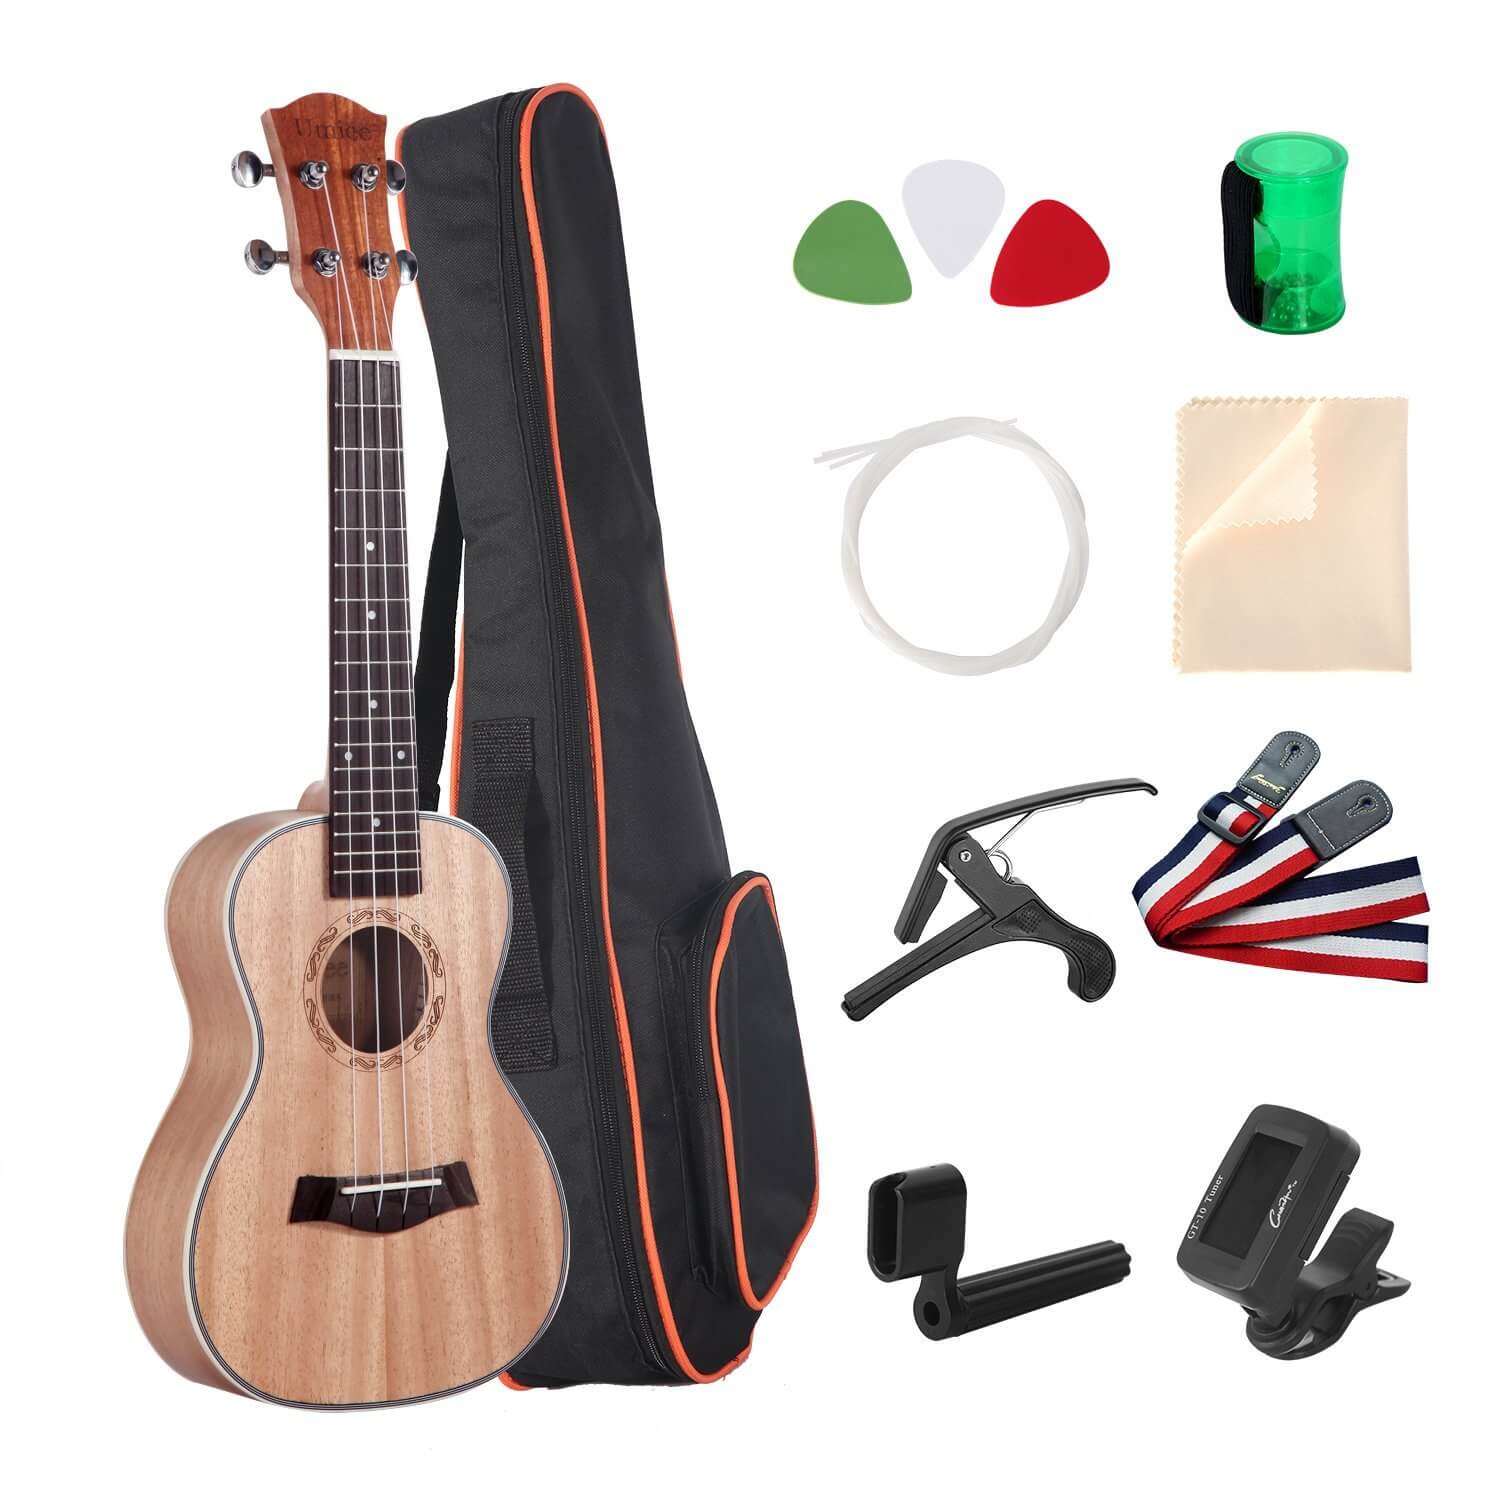 Umiee Concert Ukulele Review